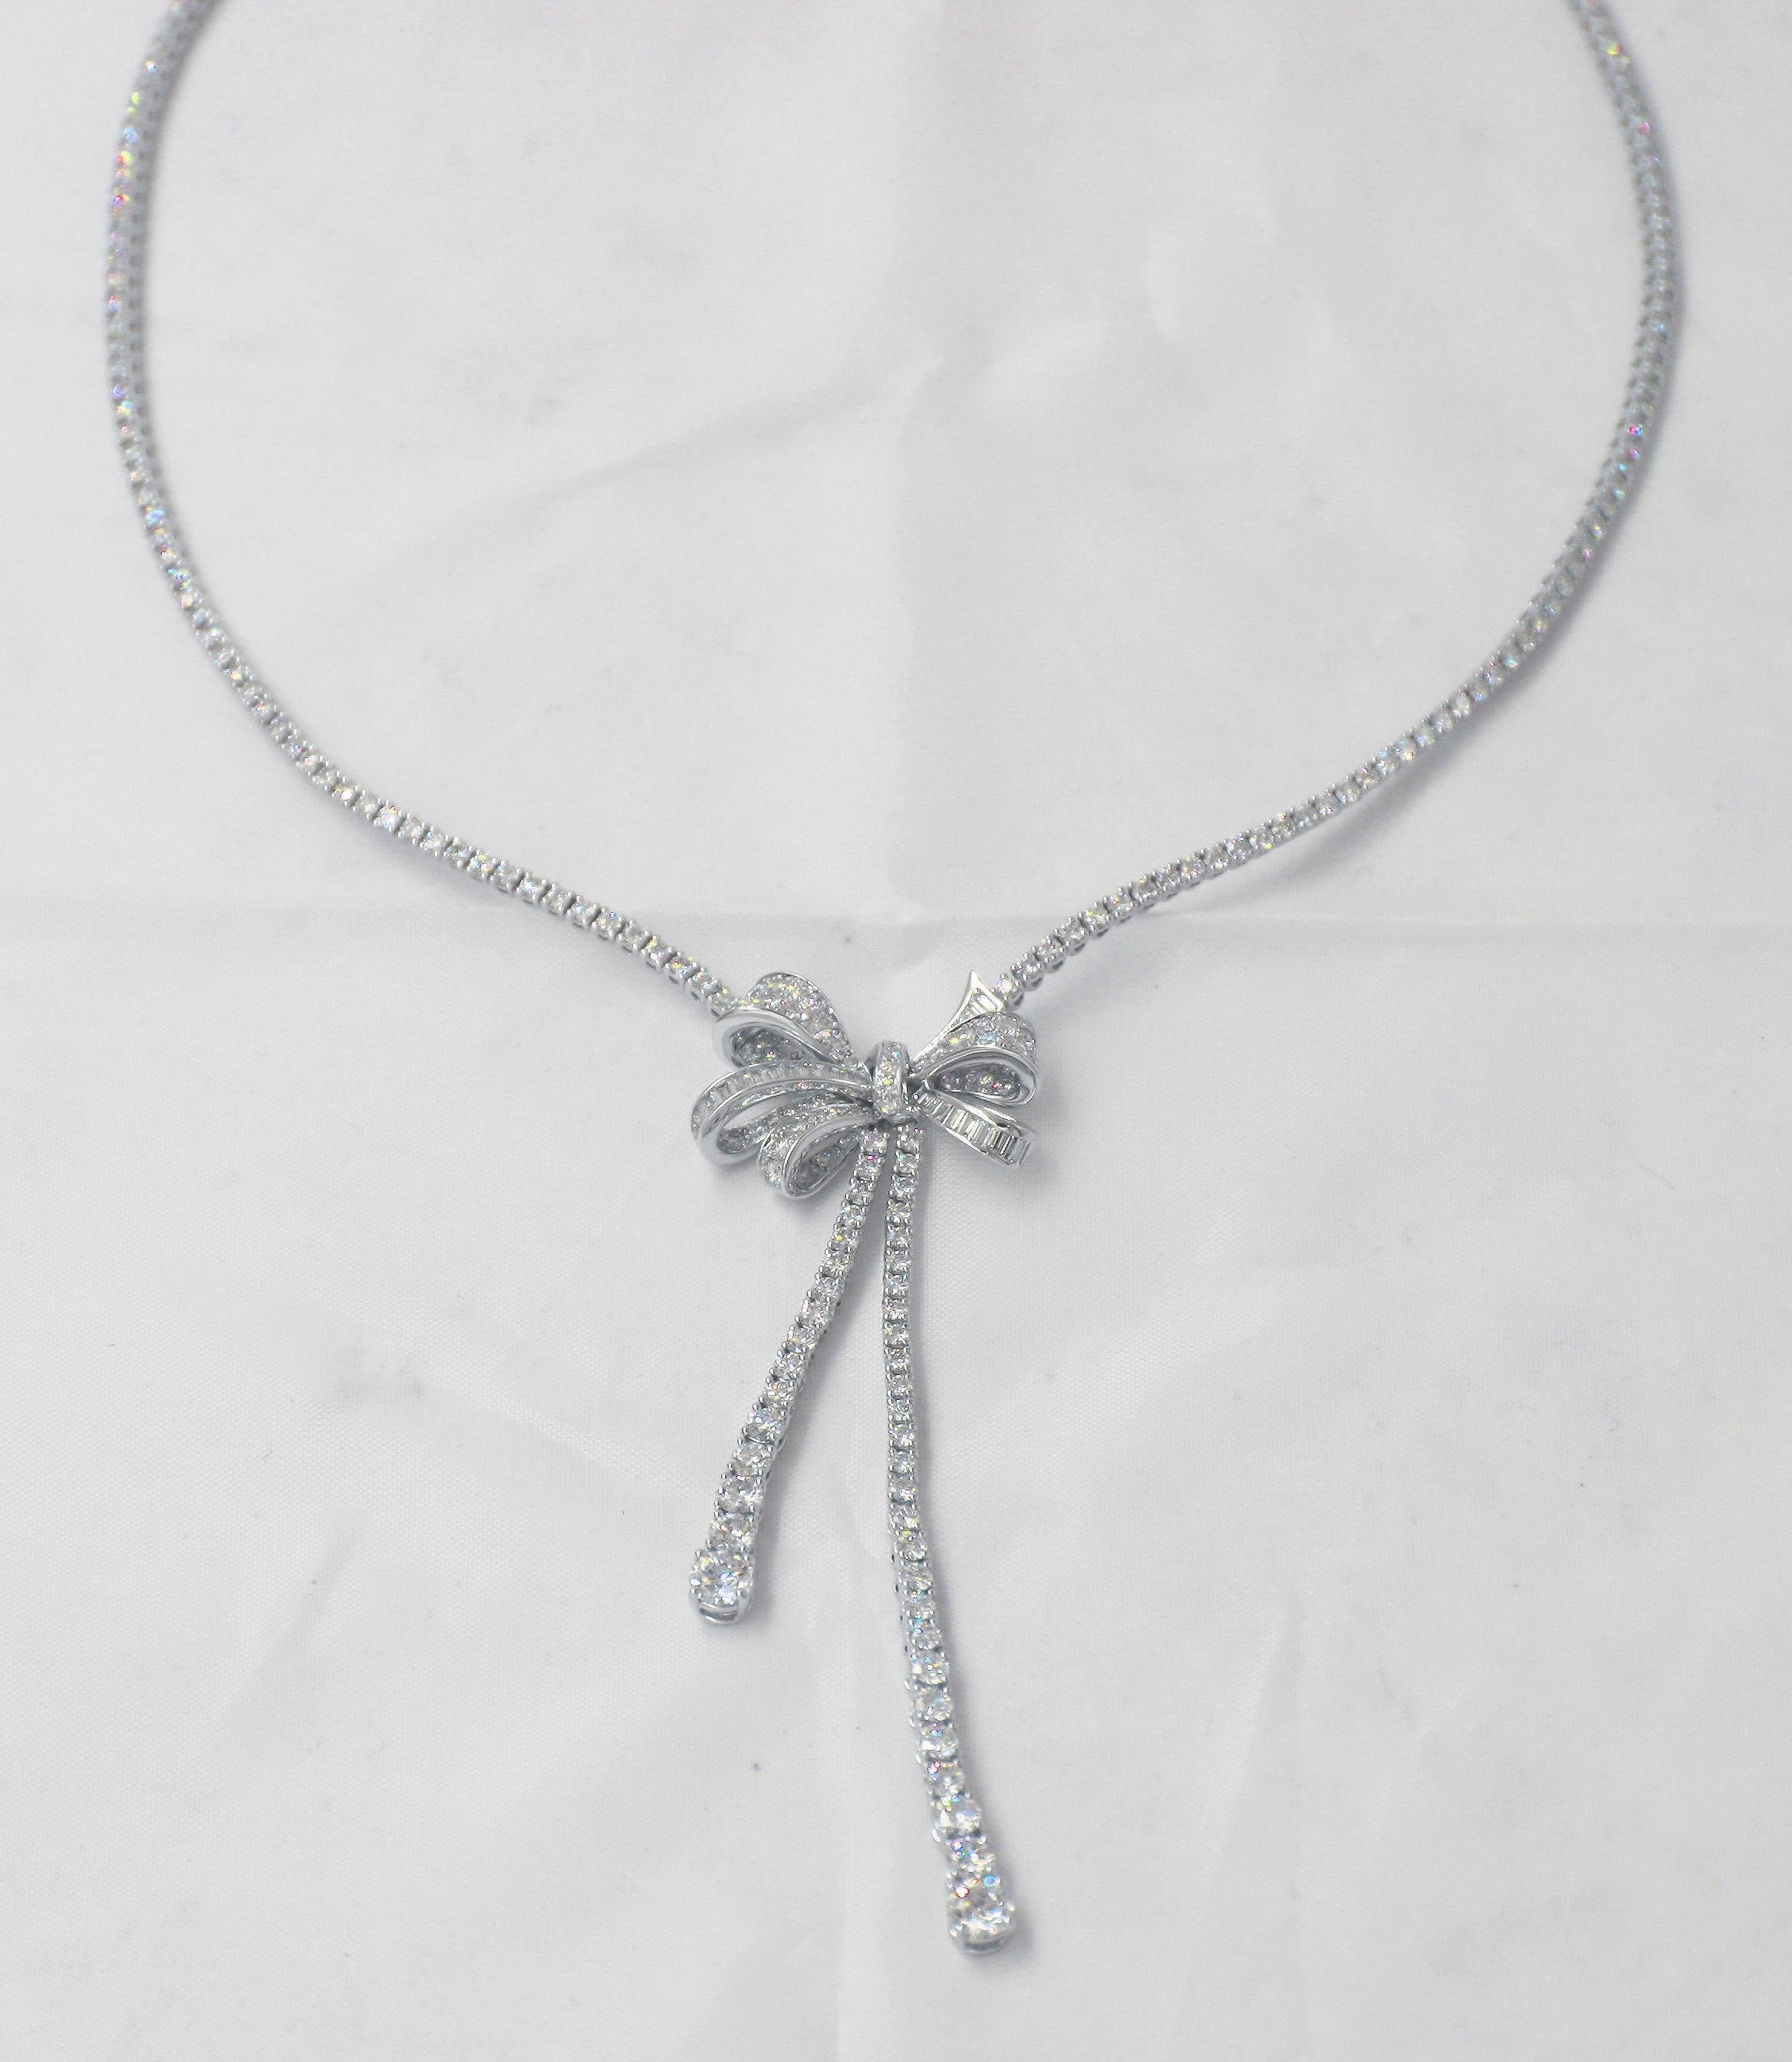 Bow Round Drop Necklace with Diamond.
27 Baguette Diamond Weighing : 0.57 cts
285 Round Diaonds Weighing: 878 cts
Total: Diamond Weight : 9.35 cts
Come with Pouch and Certificate.
Reference Number : RGN461